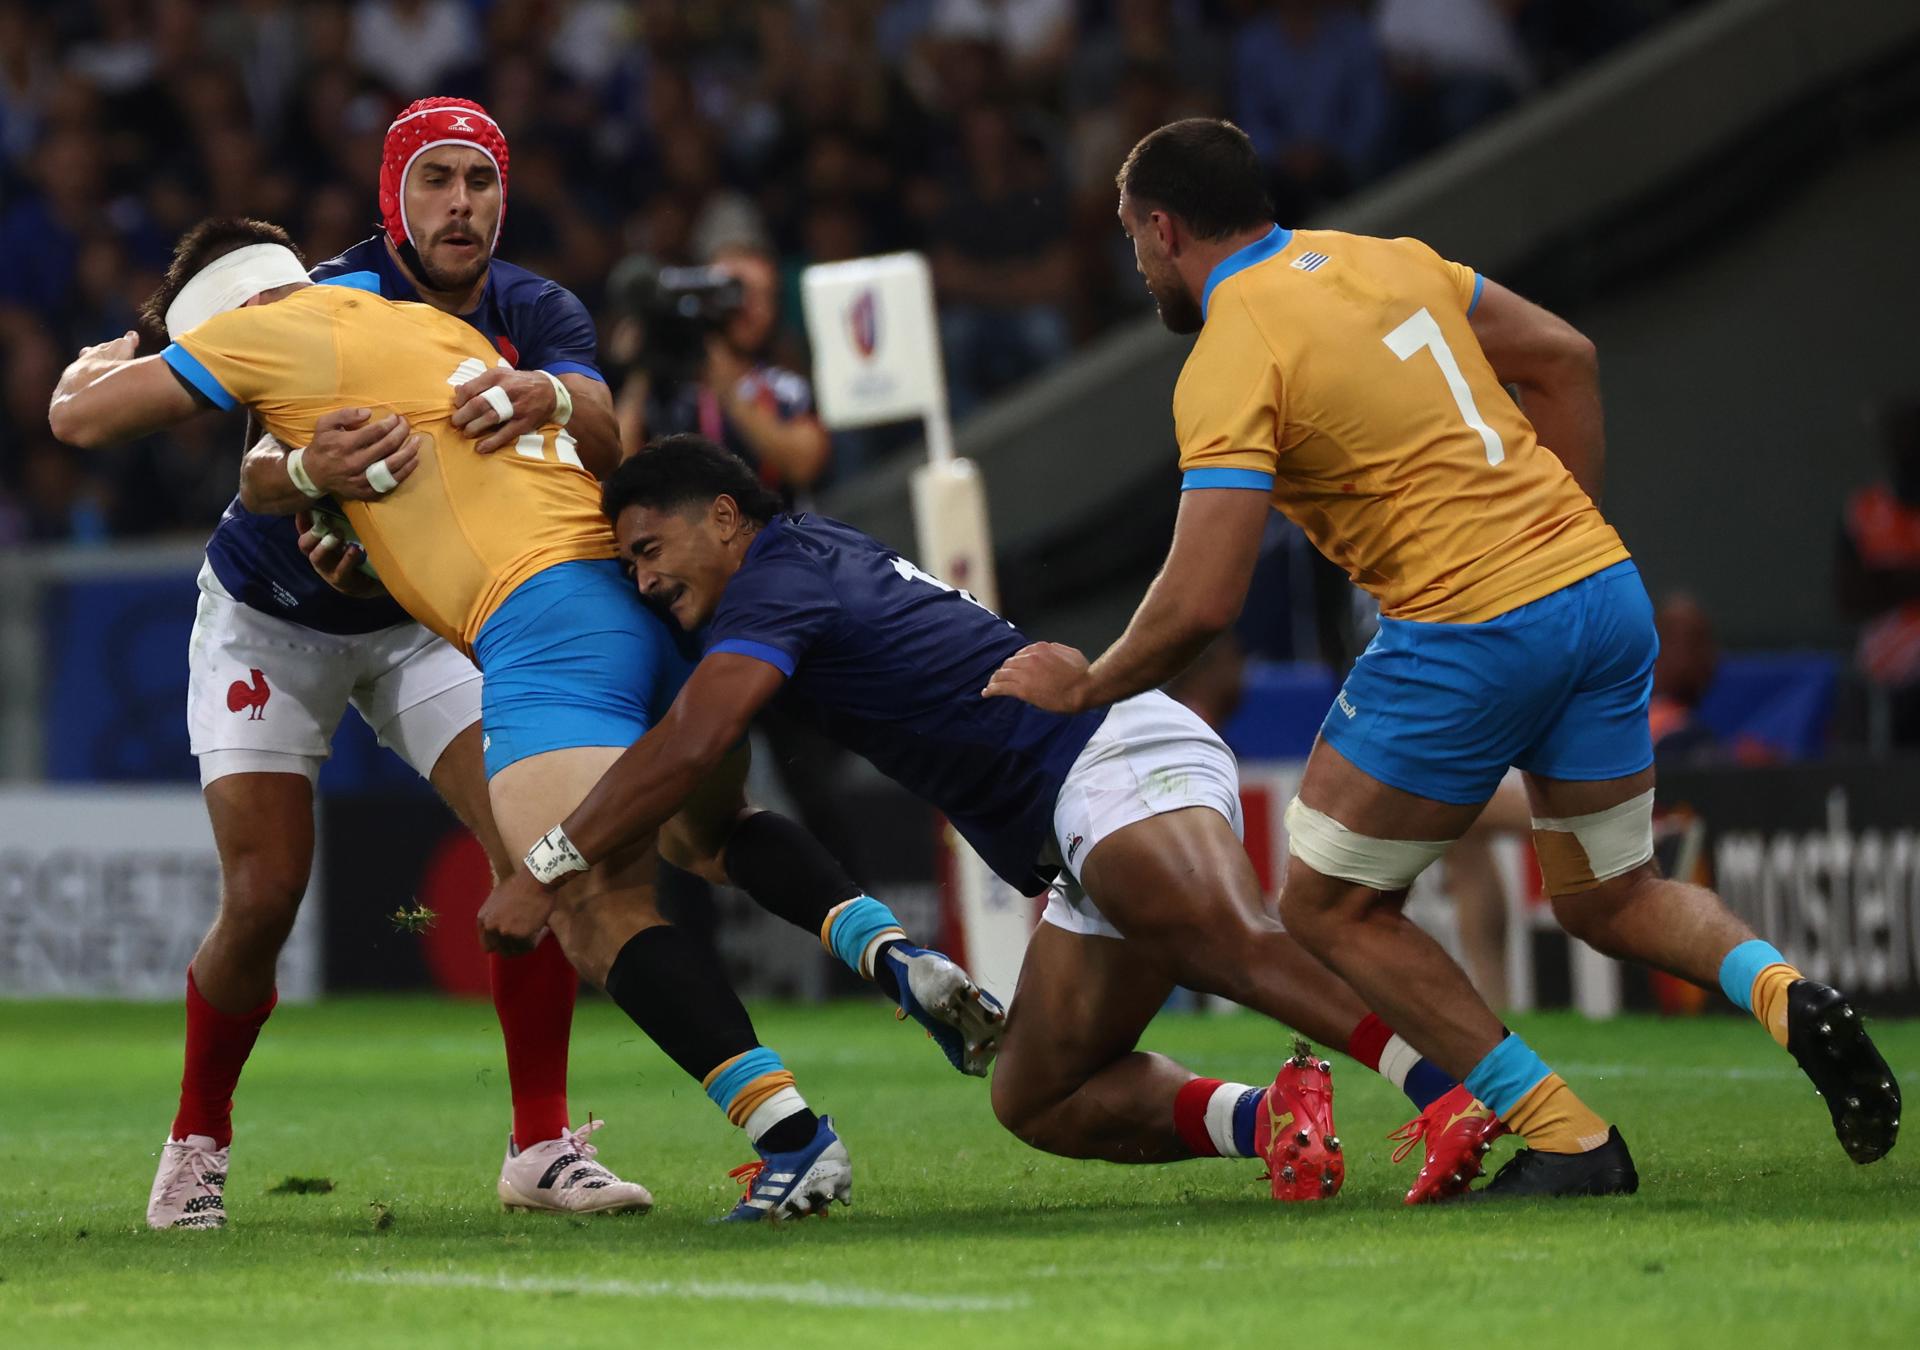 Uruguay's Andres Vilaseca (R) and France's Damien Penaud (L) in action during the Rugby World Cup Pool A match between France and Uruguay, in Lille, France, 14 September 2023. EFE-EPA/MOHAMMED BADRA
